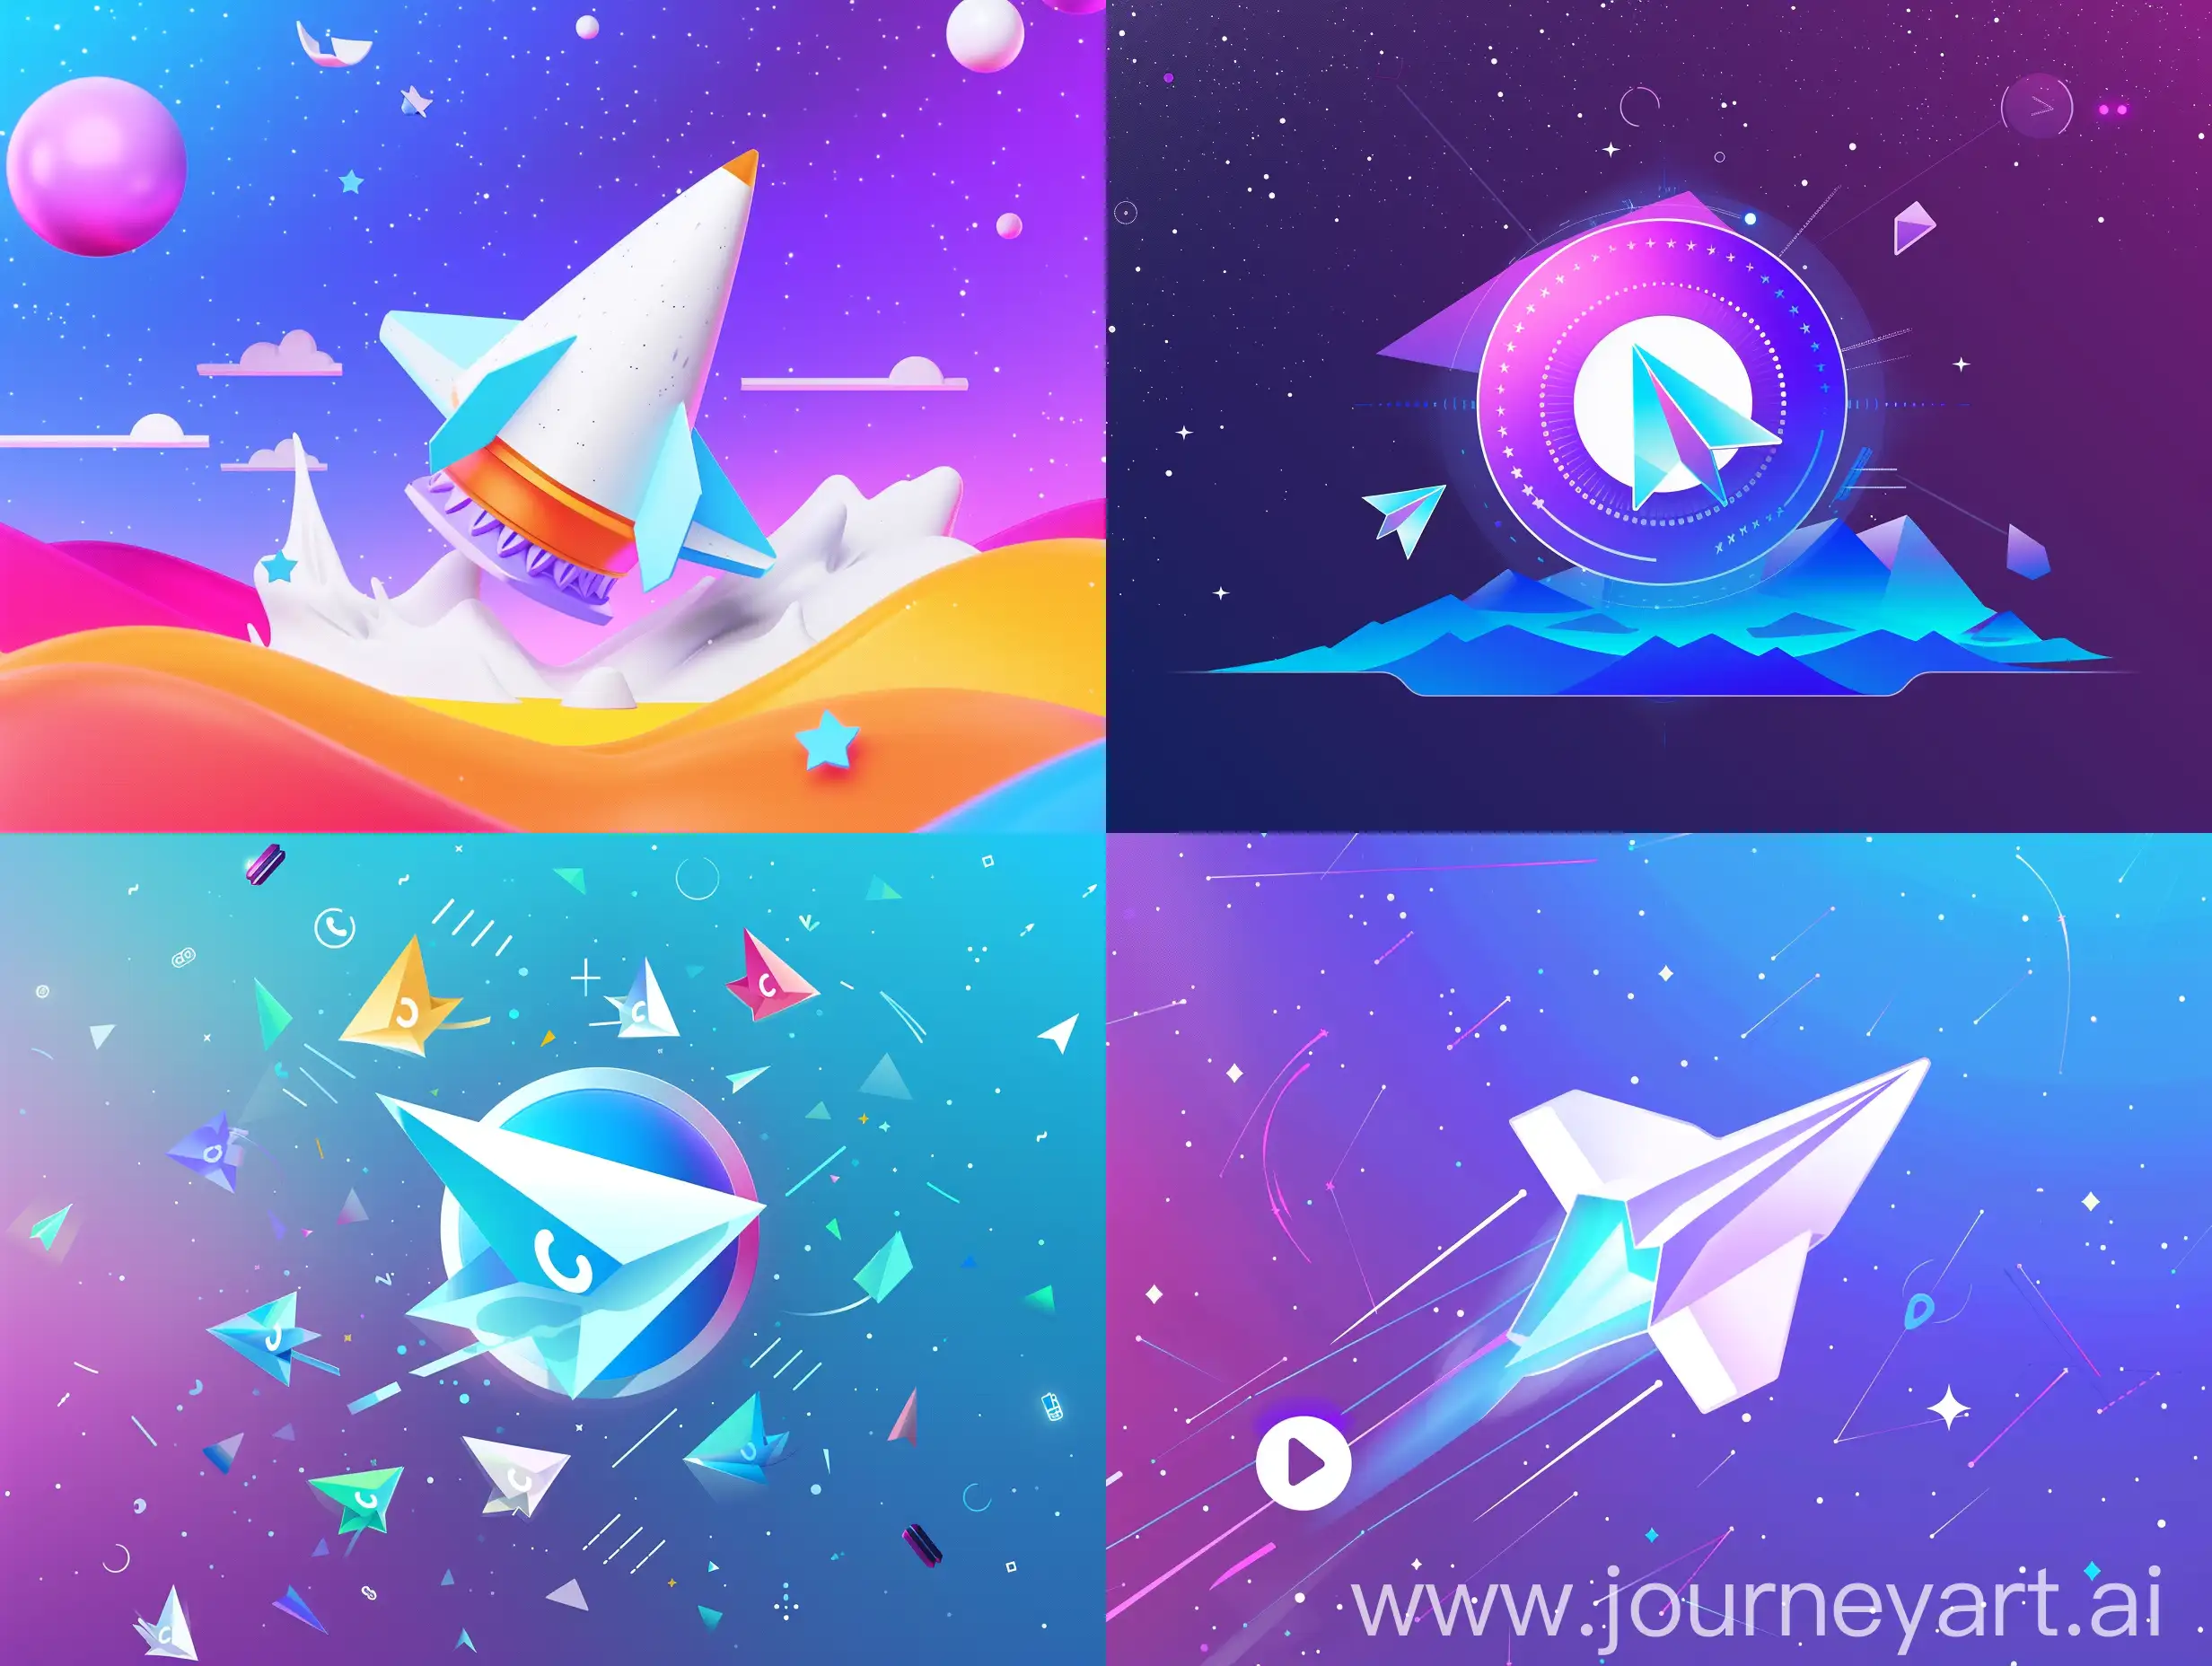 Create a picture for me that is about rewards for inviters for Telegram channel, use encouraging colors, have high quality, be attractive with meaning.